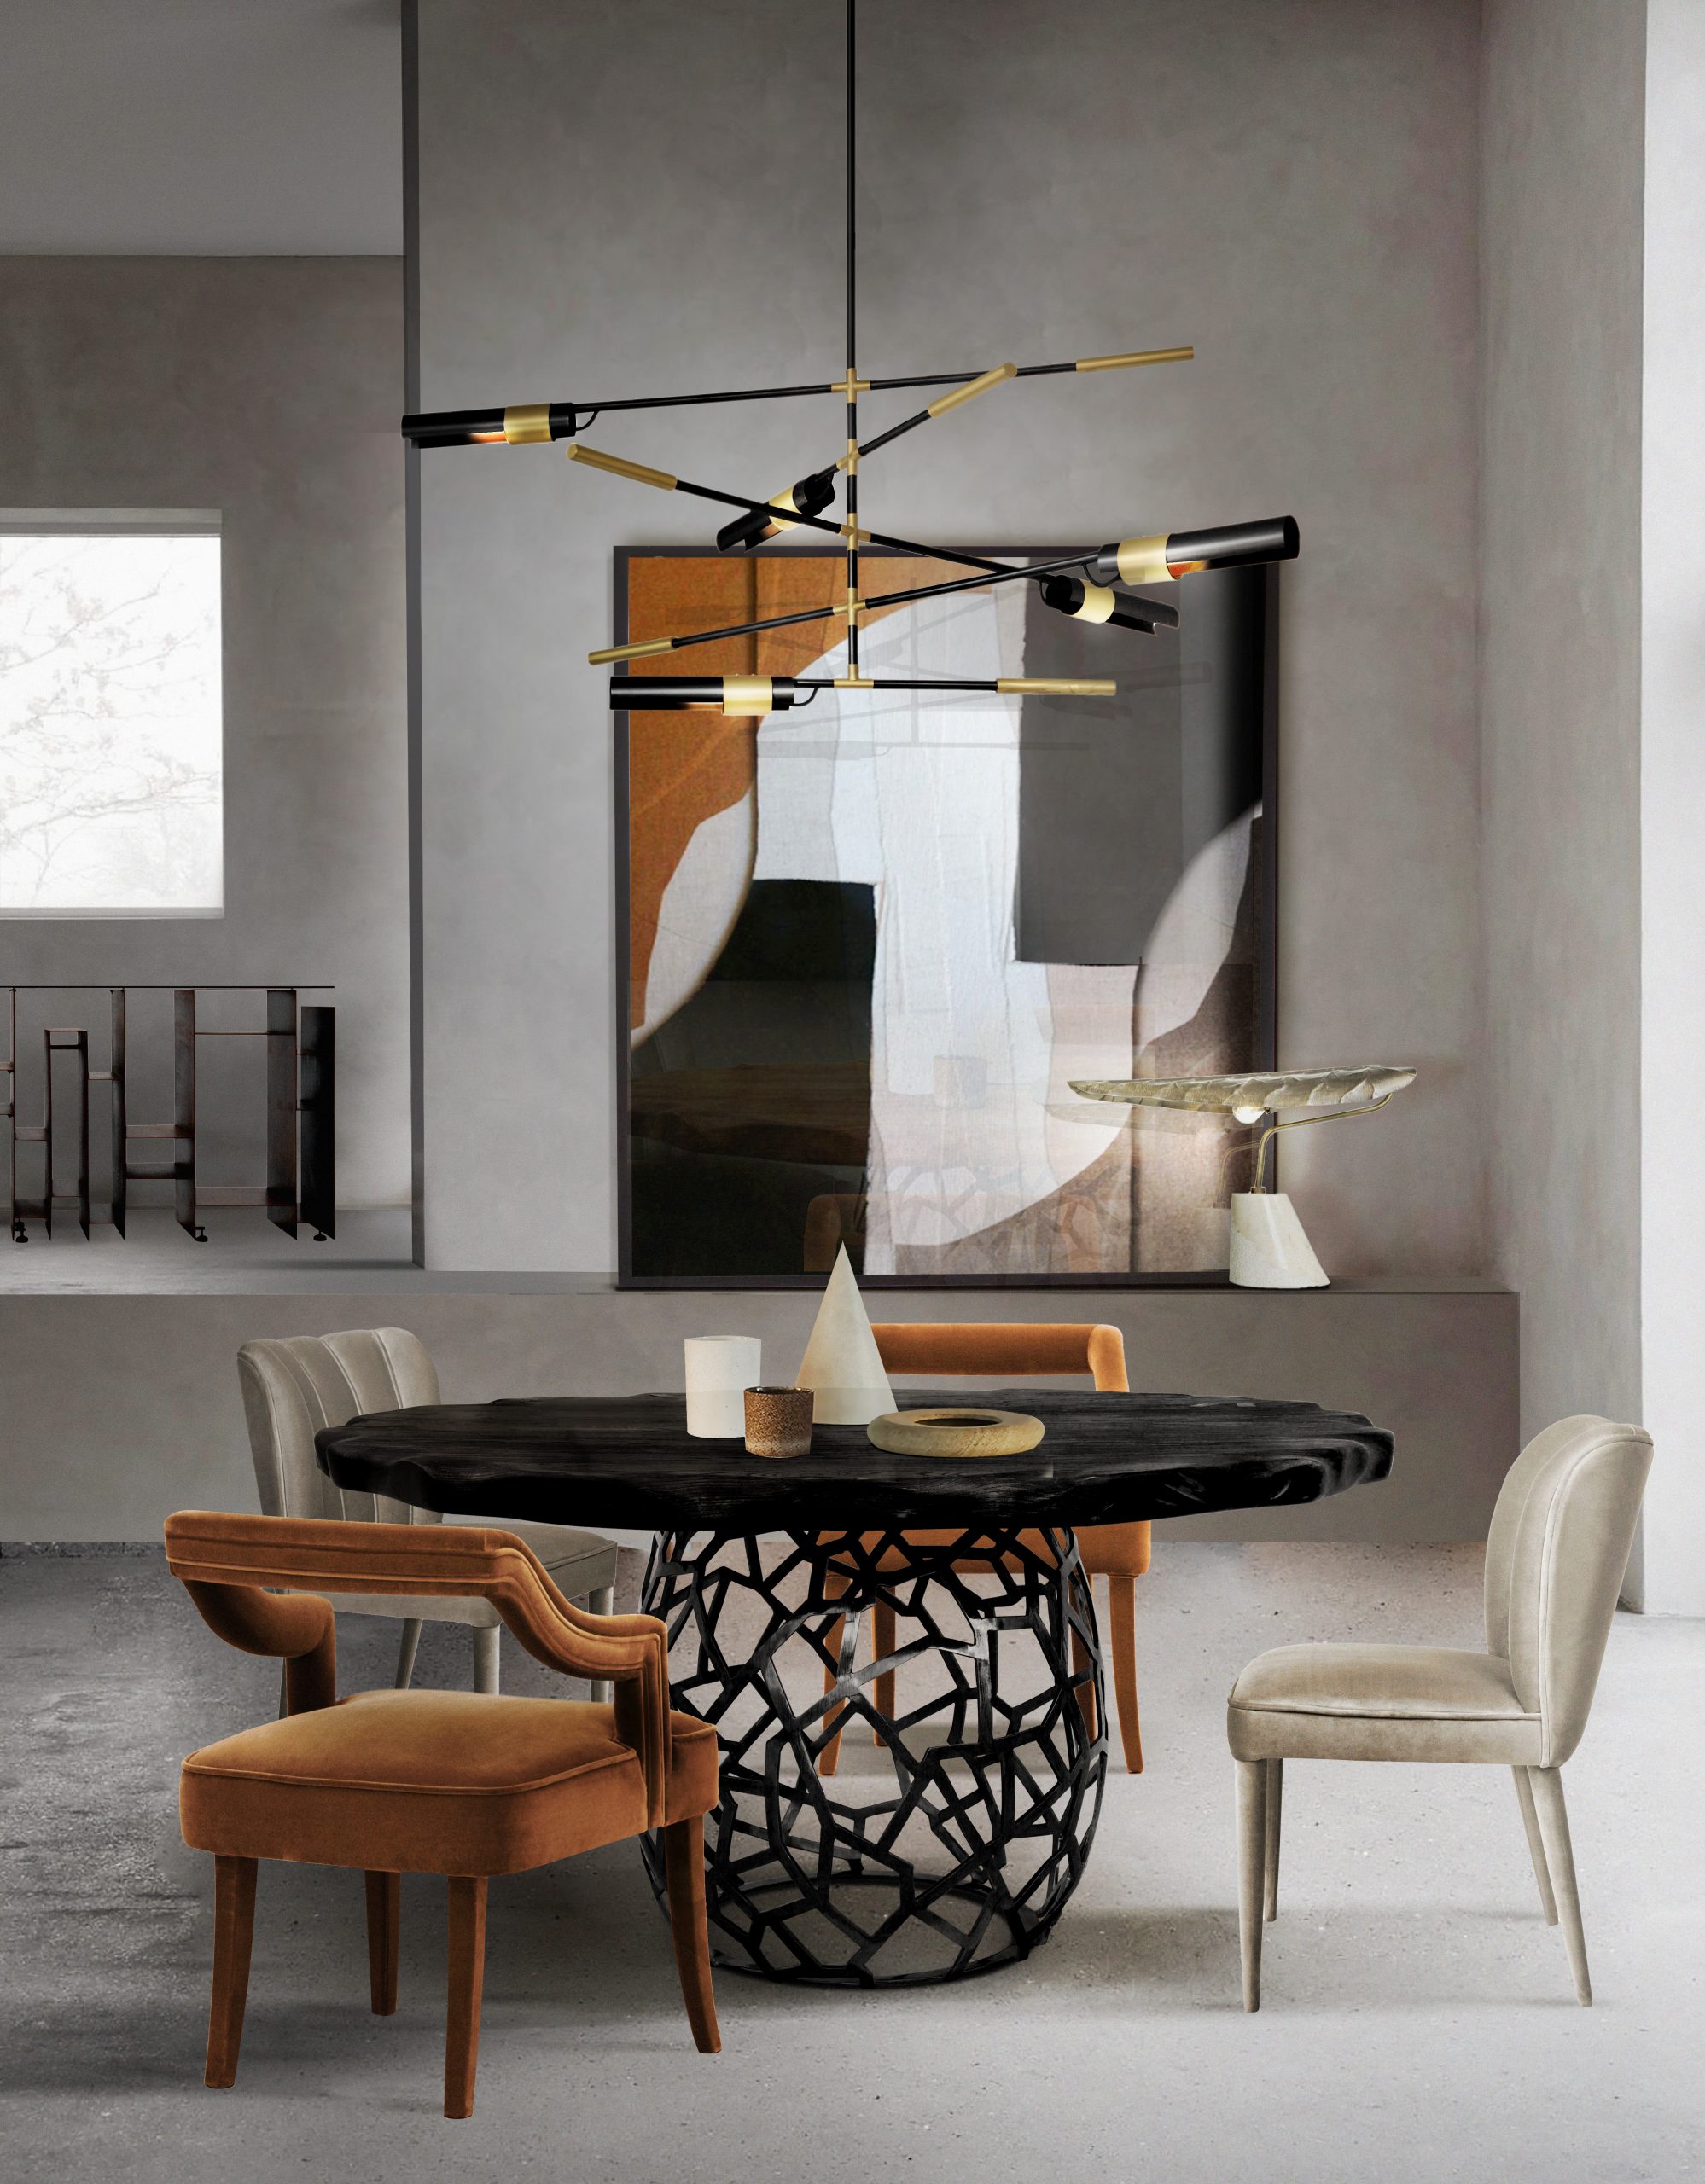 https://www.brabbu.com/room-by-room/contemporary-dining-room-with-apis-dining-table?utm_source=blog&utm_medium=article-image&utm_content=homeinspirationideas-give-your-home-a-modern-decor&utm_campaign=brandawareness&utm_term=sramos home inspiration ideas